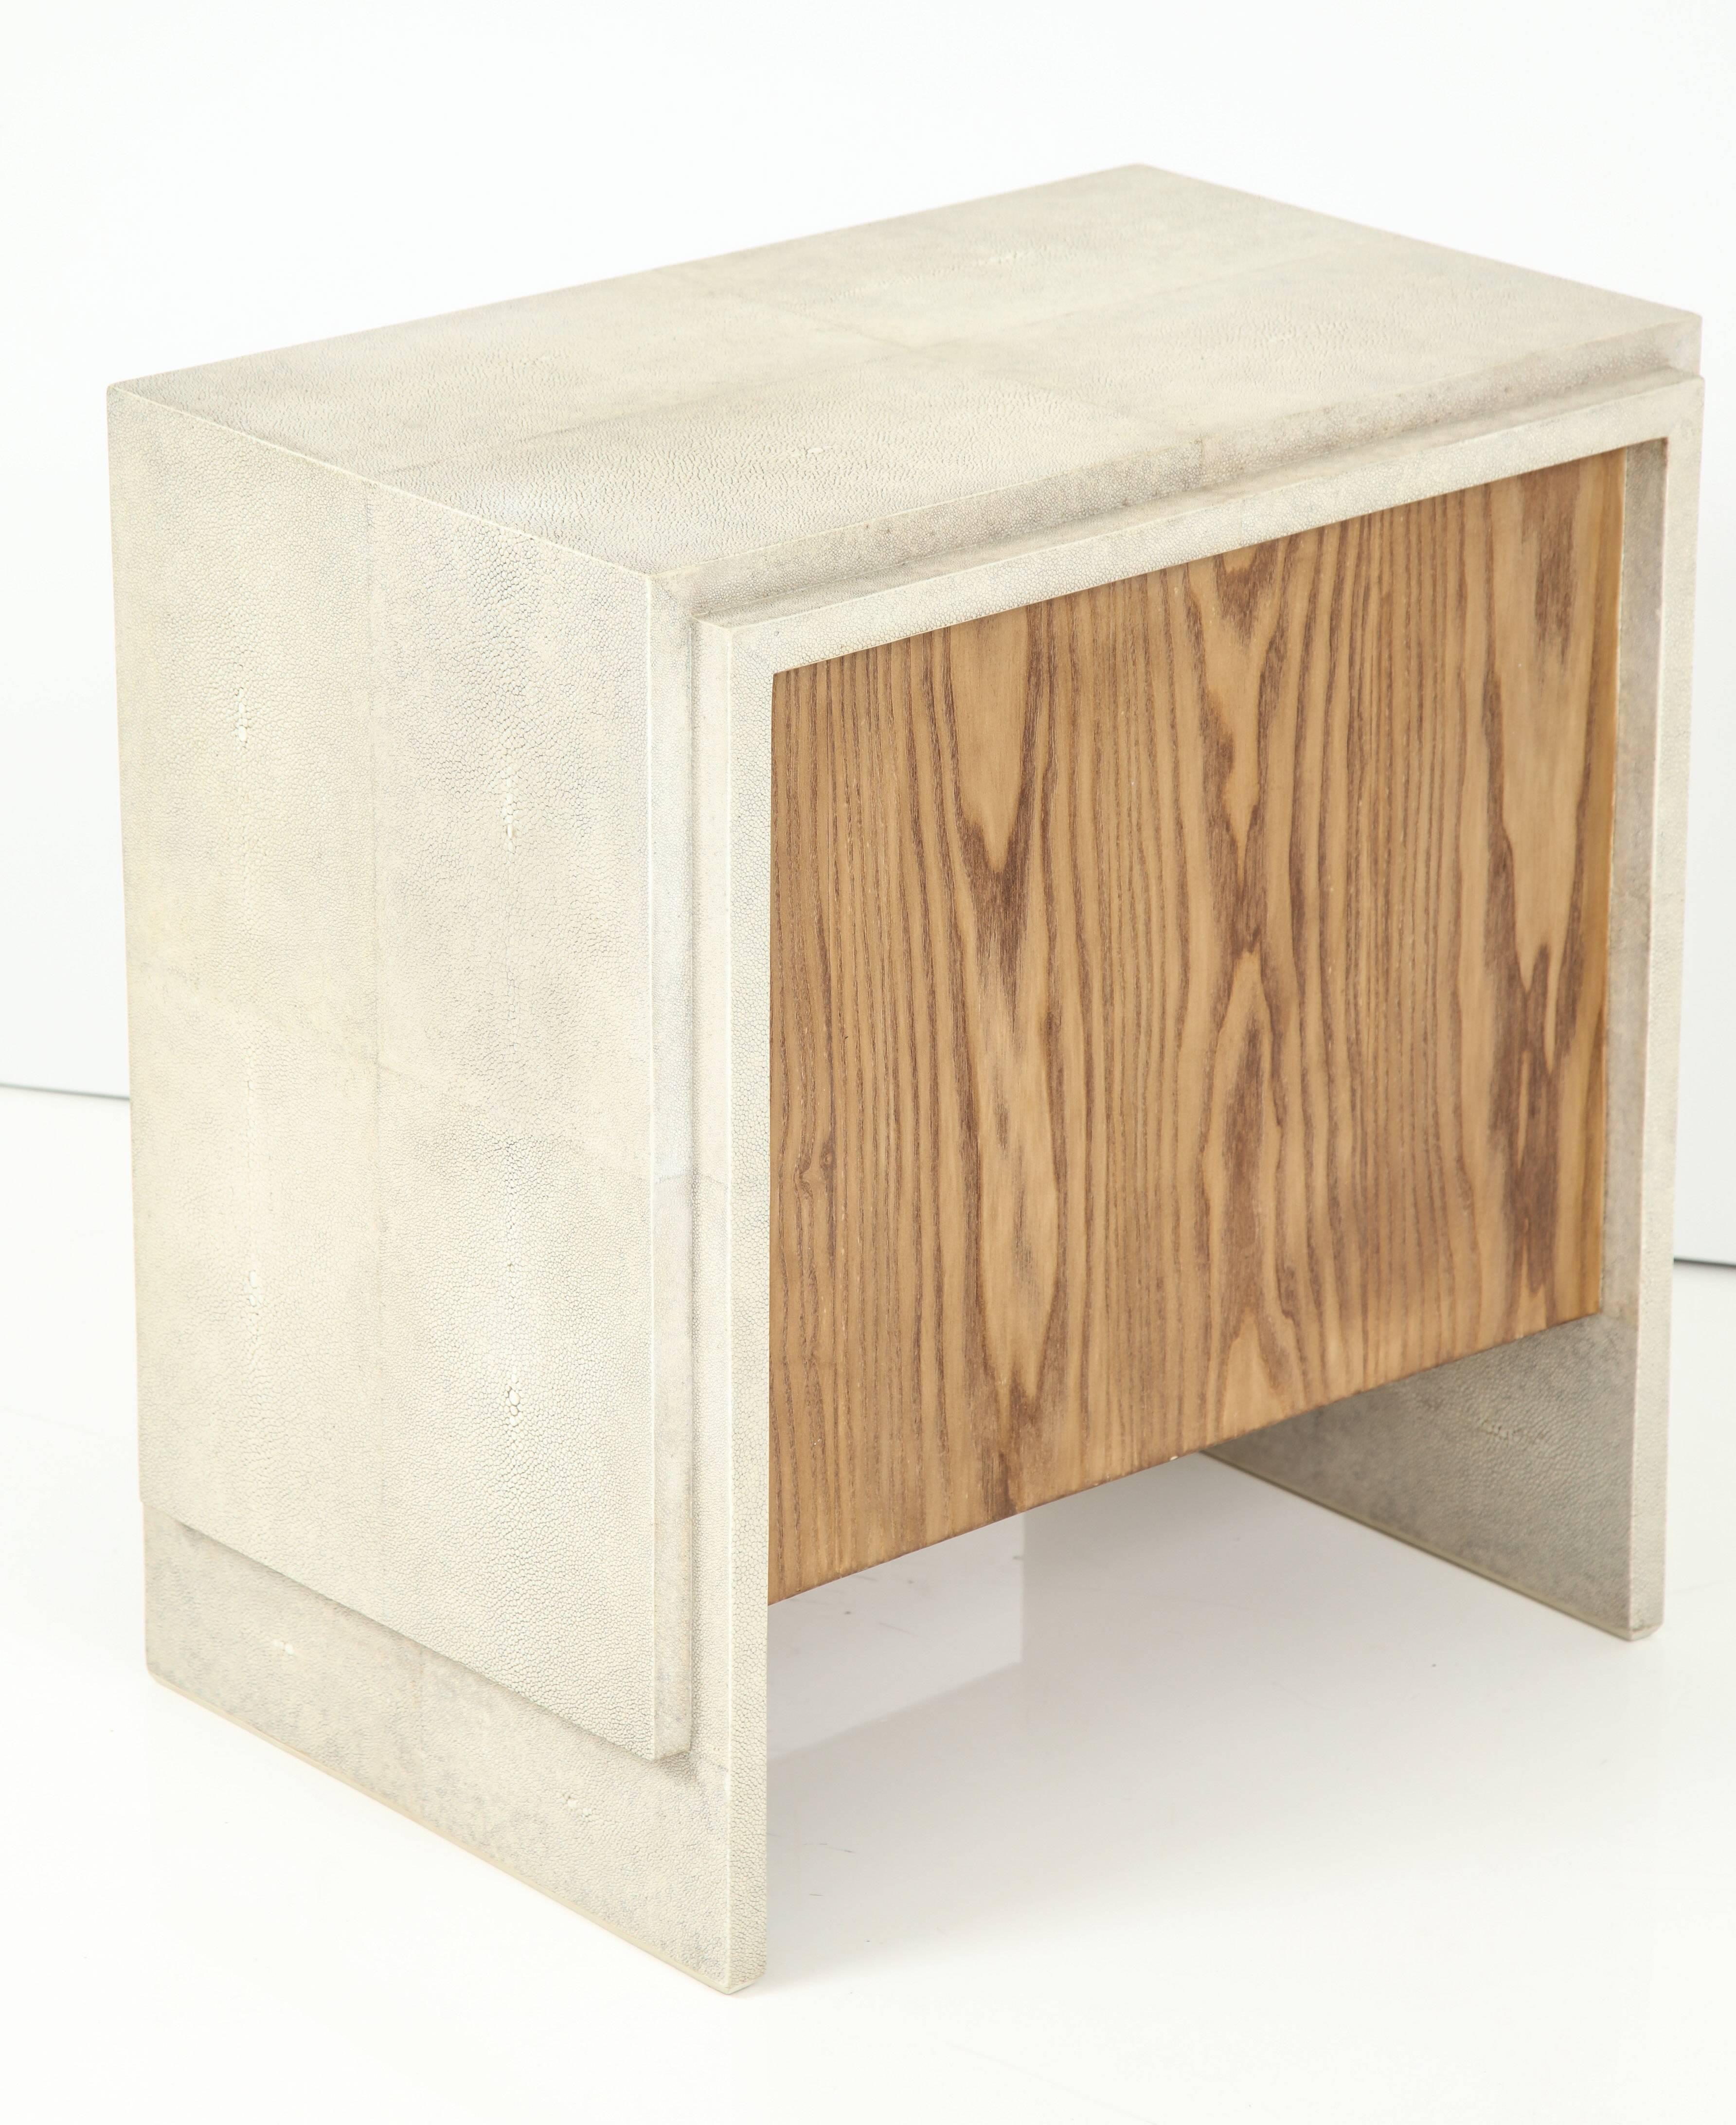 Contemporary Shagreen Side Tables or Nightstands, Designed In France, Cream Colored Shagreen